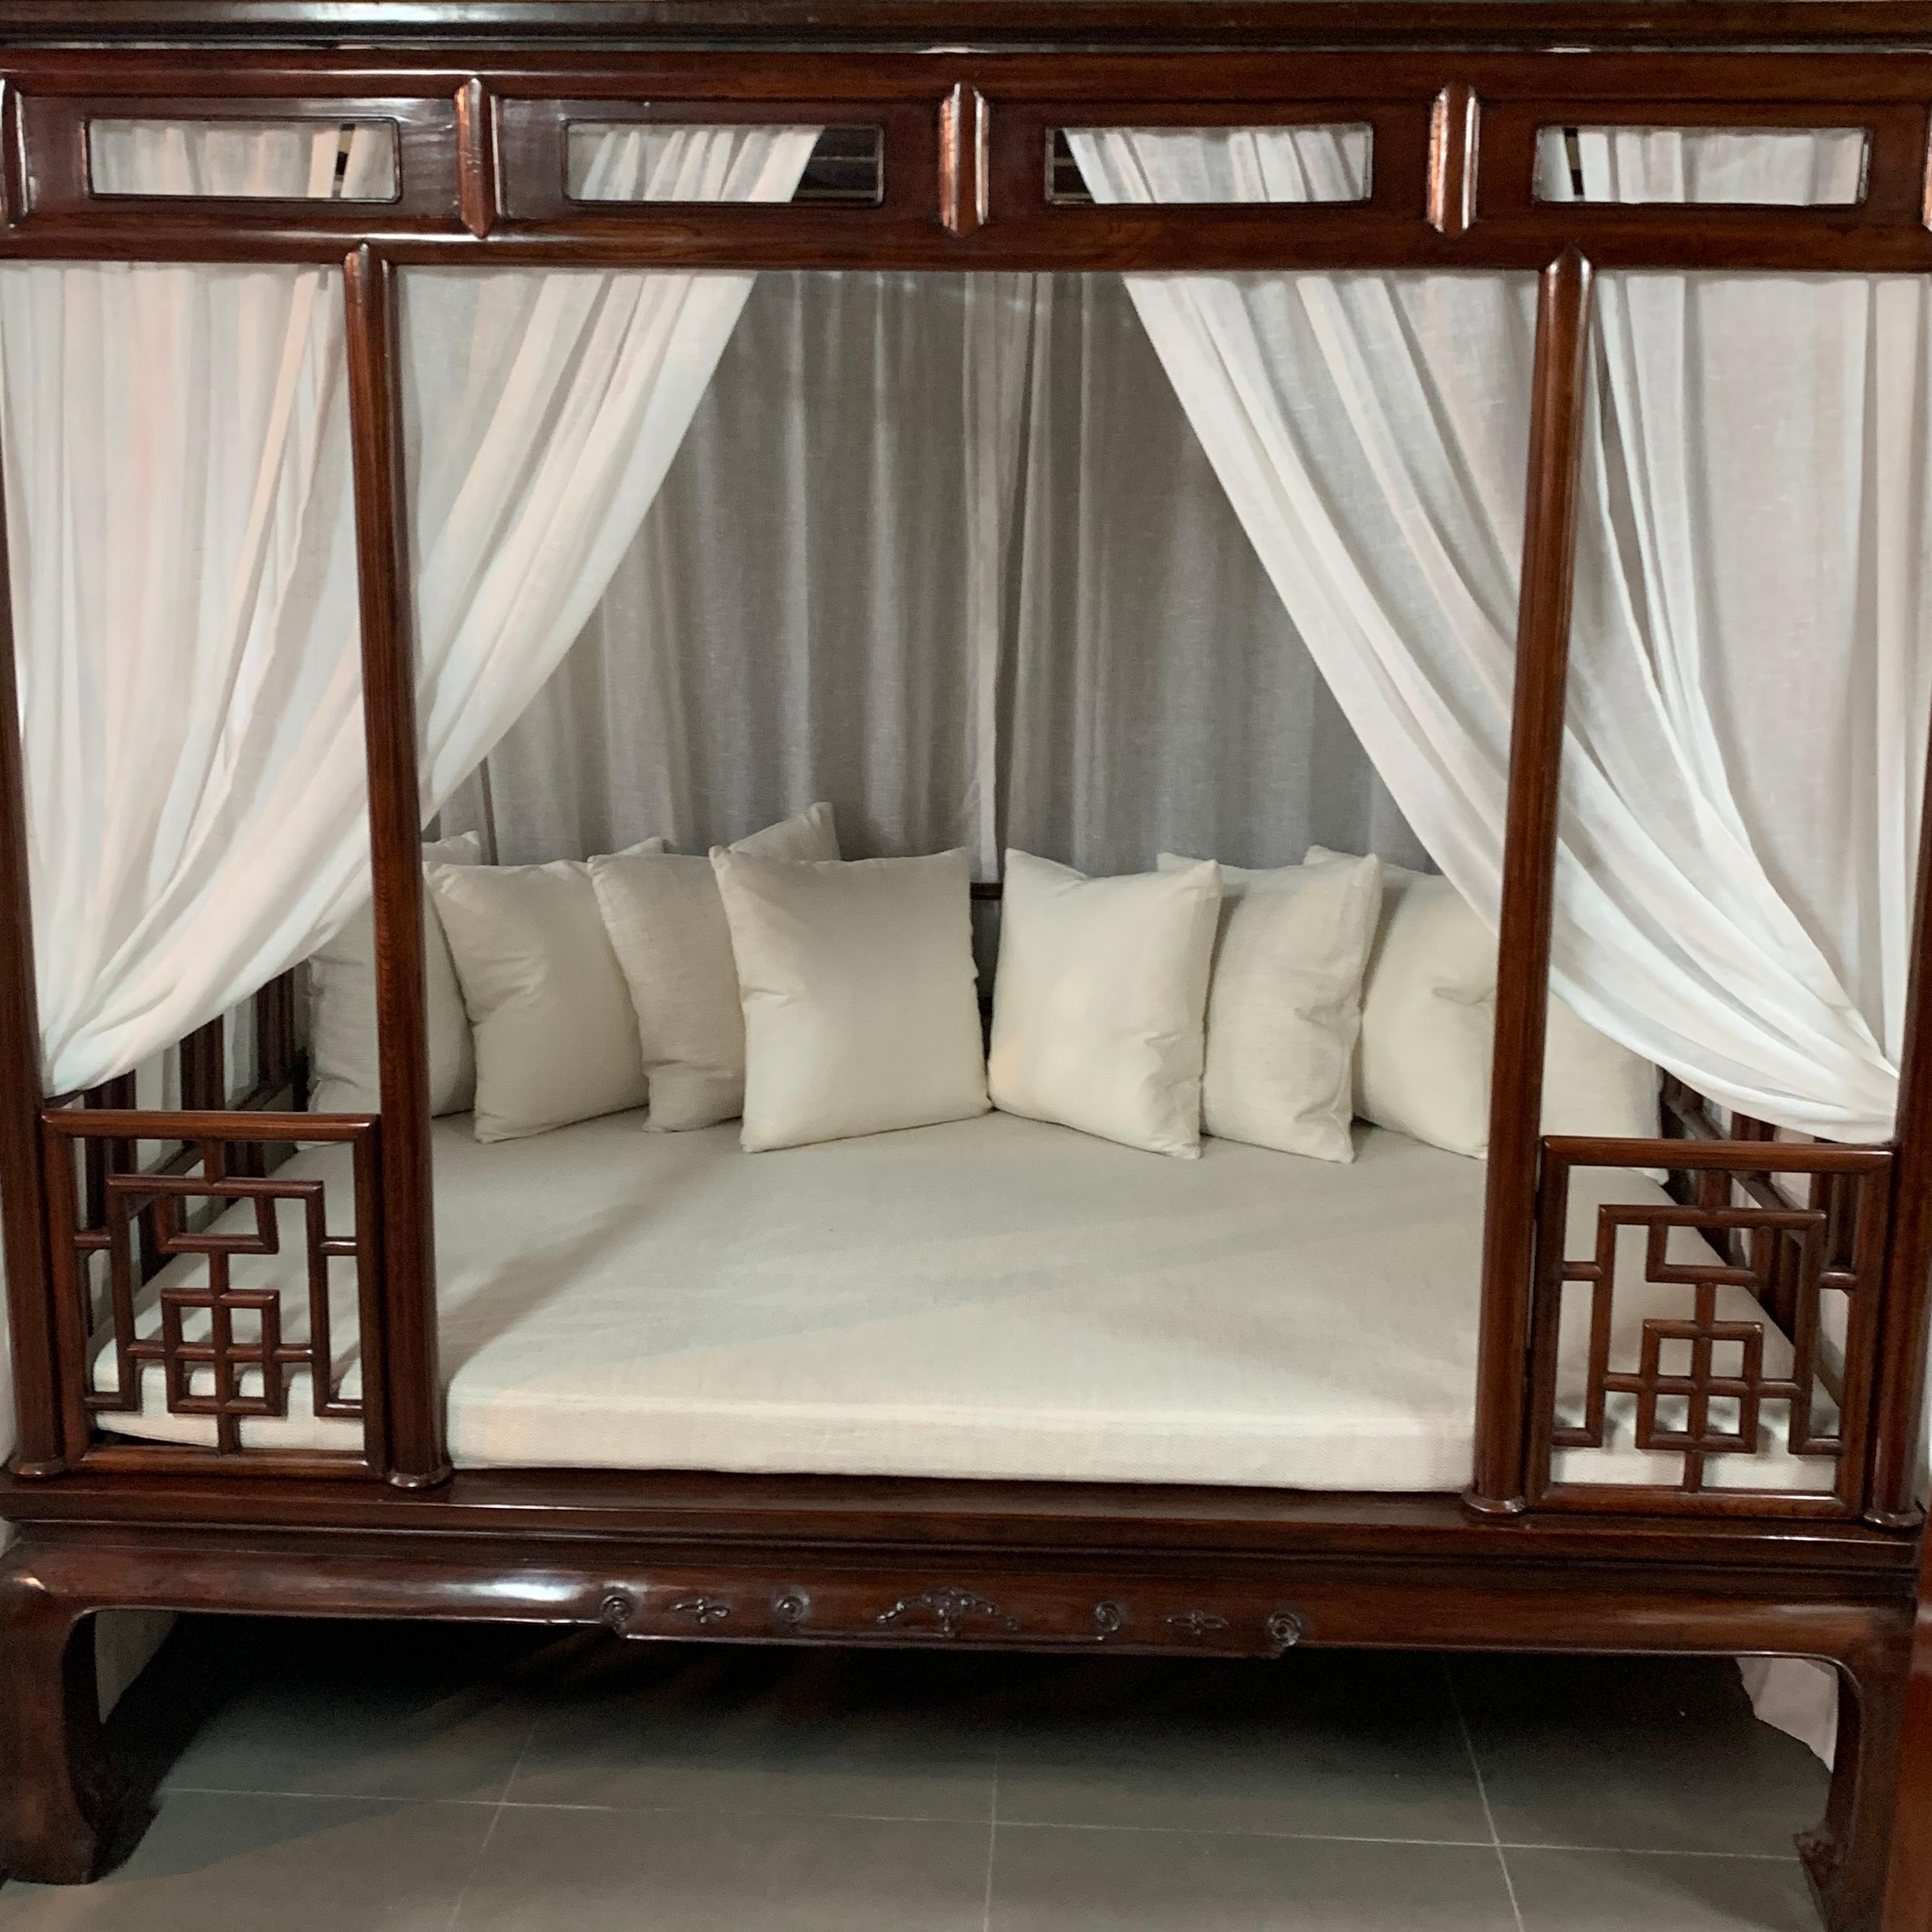 The bed base with a waist, ice-plate edged frame enclosing a cane top, slightly convex aprons with relief-carving and beading continuing to the horse hoof feet, six posts forming the frame for the railings and canopy, decorated with fretwork of